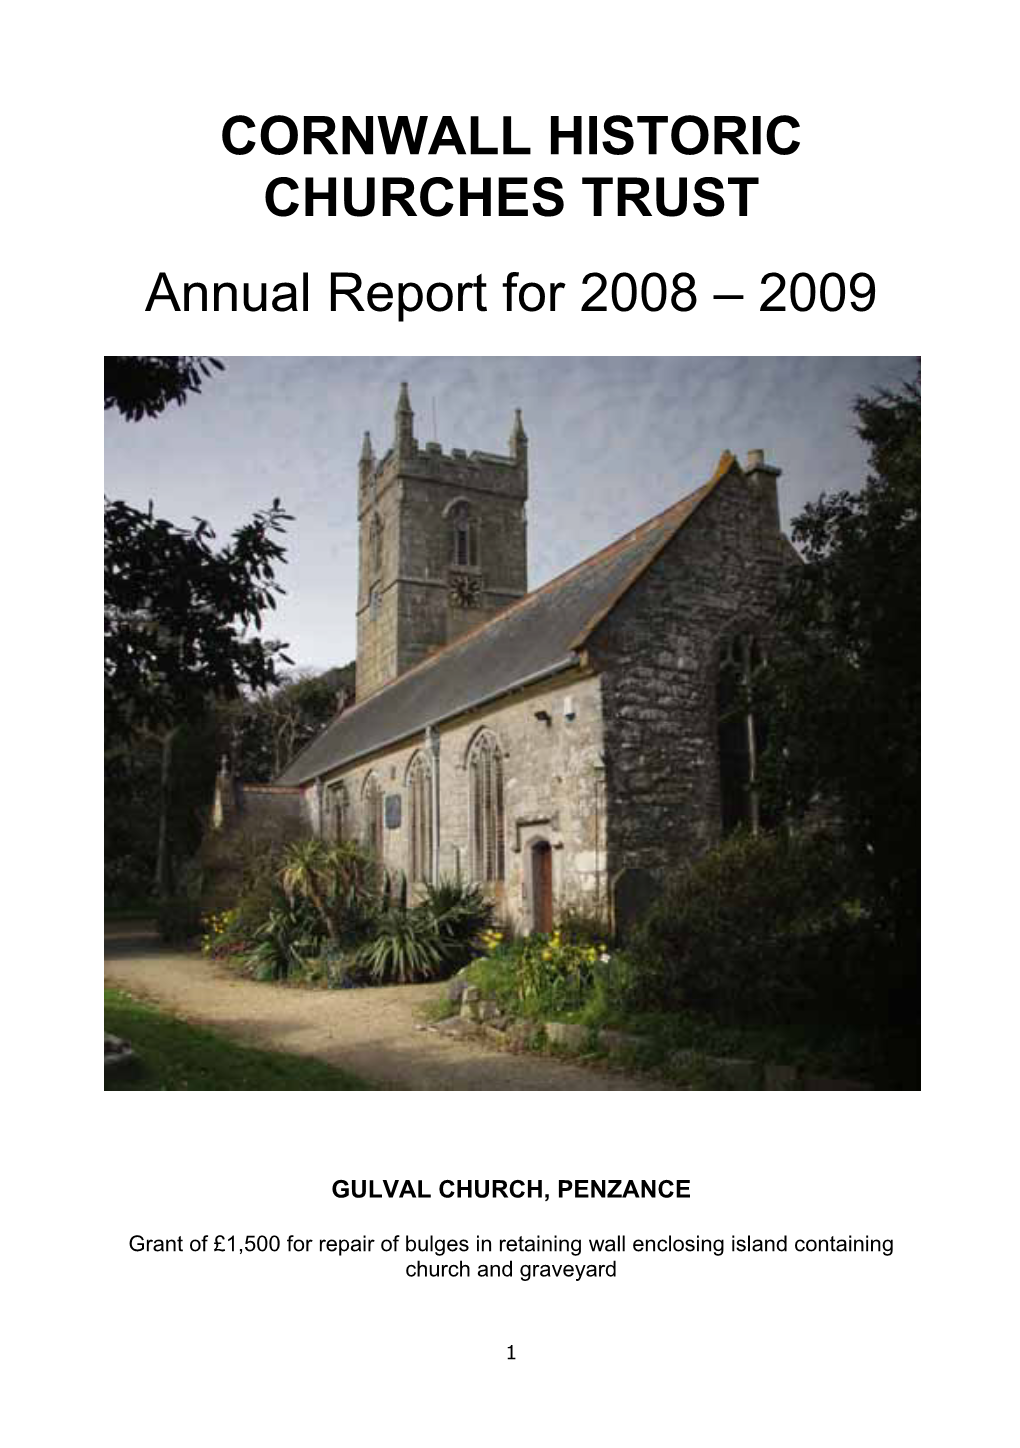 CHCT 2009 Annual Report